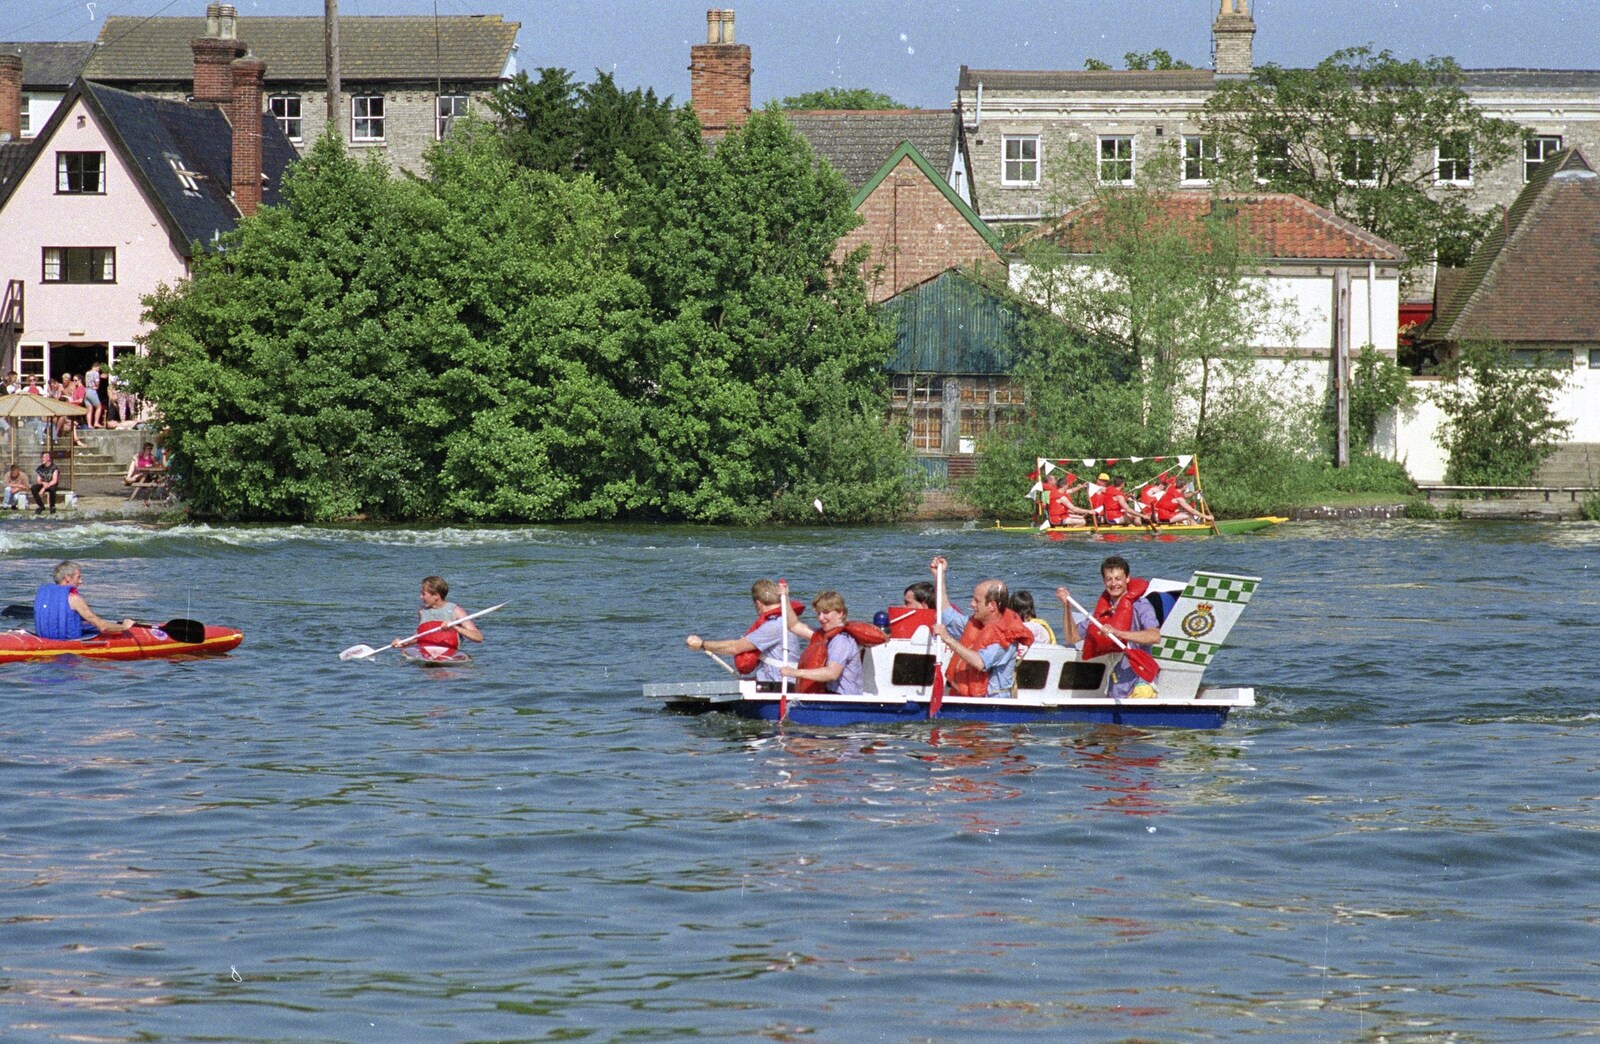 Jan and the ambulance team paddle around from The Diss Raft Race, Diss Mere, Norfolk - 6th July 1991